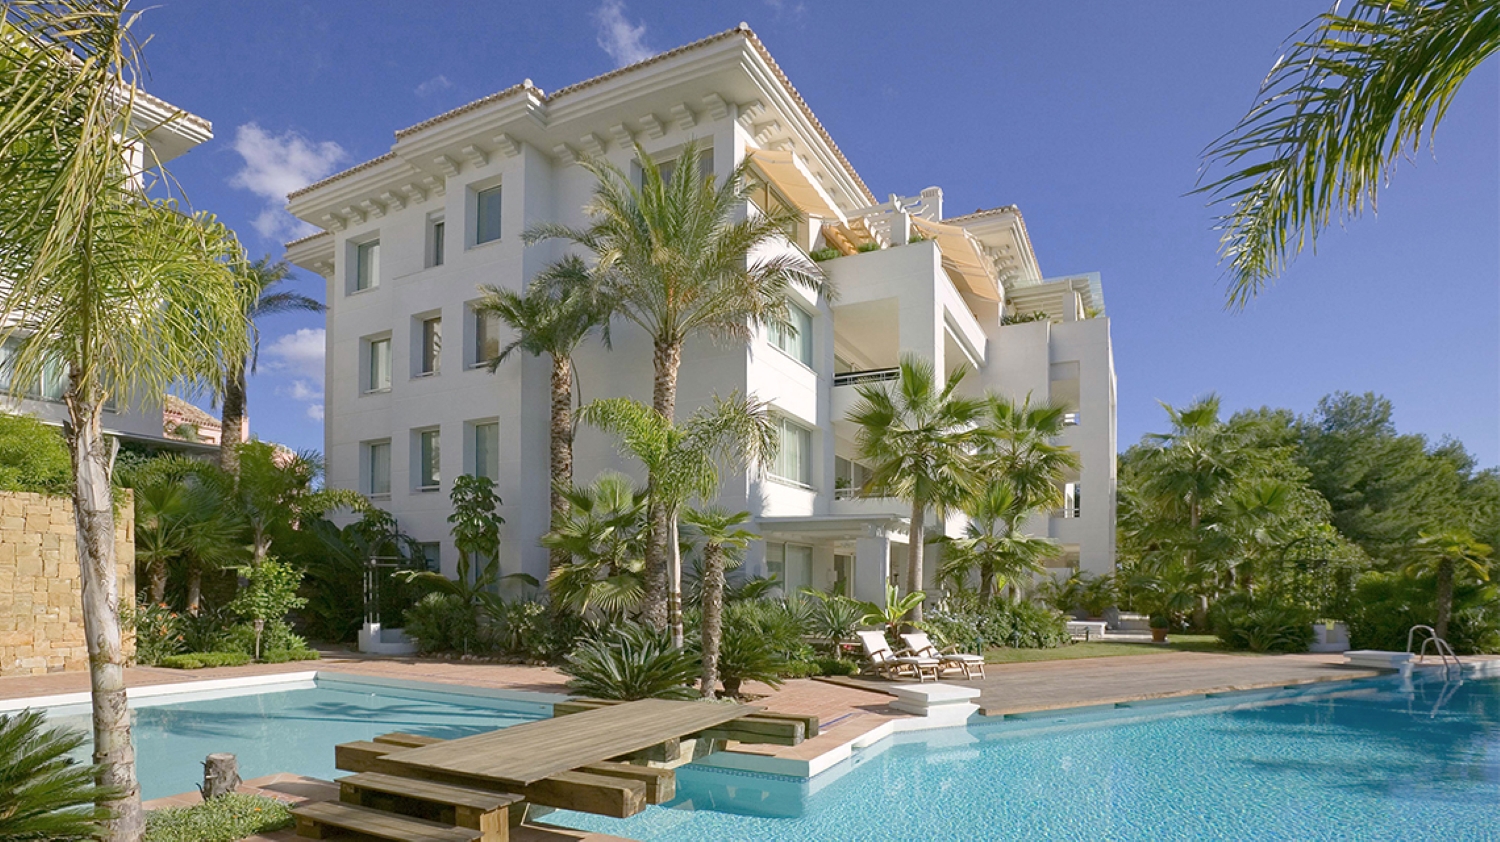 Fantastic south west facing duplex penthouse in Marbella